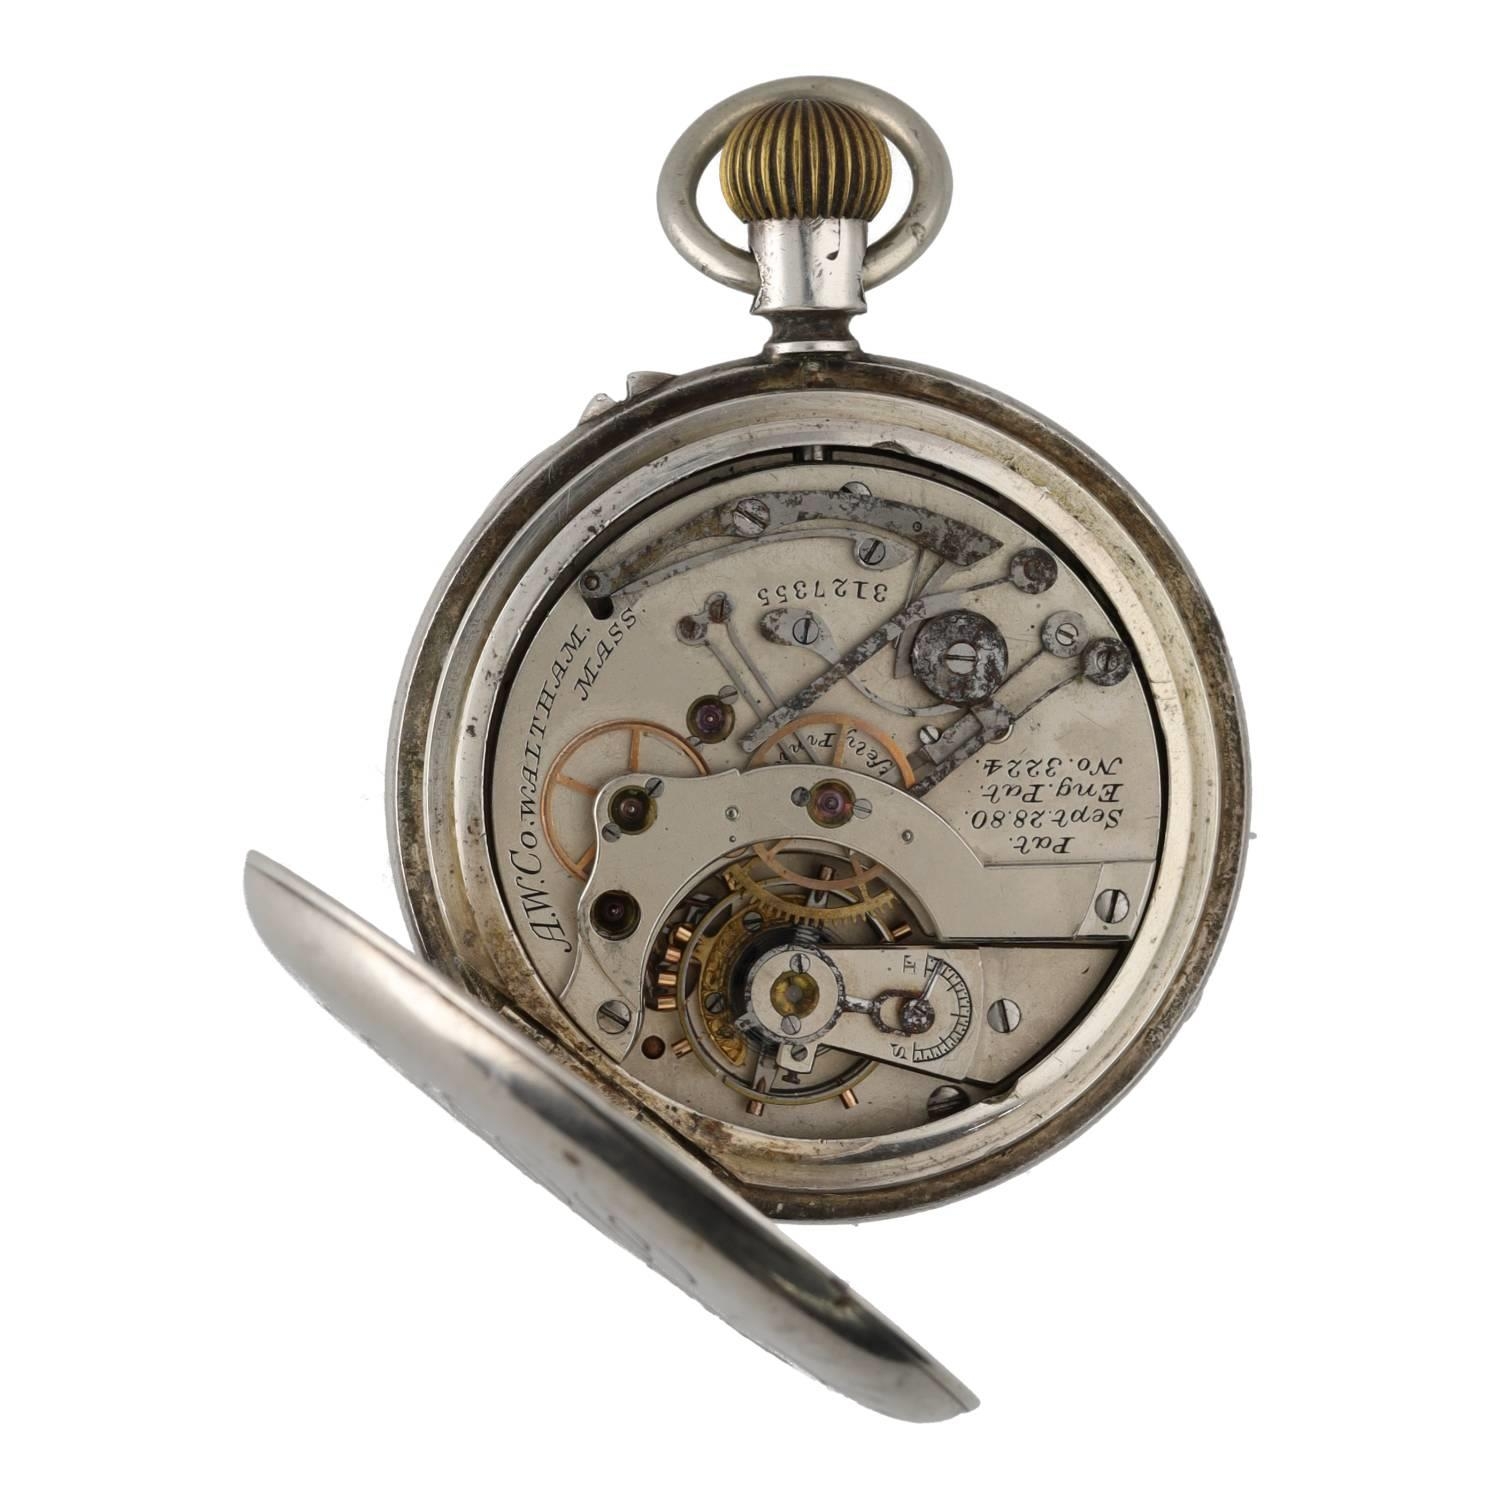 American Waltham silver chronograph lever pocket watch, circa 1886, serial no. 3127355, signed - Image 3 of 4